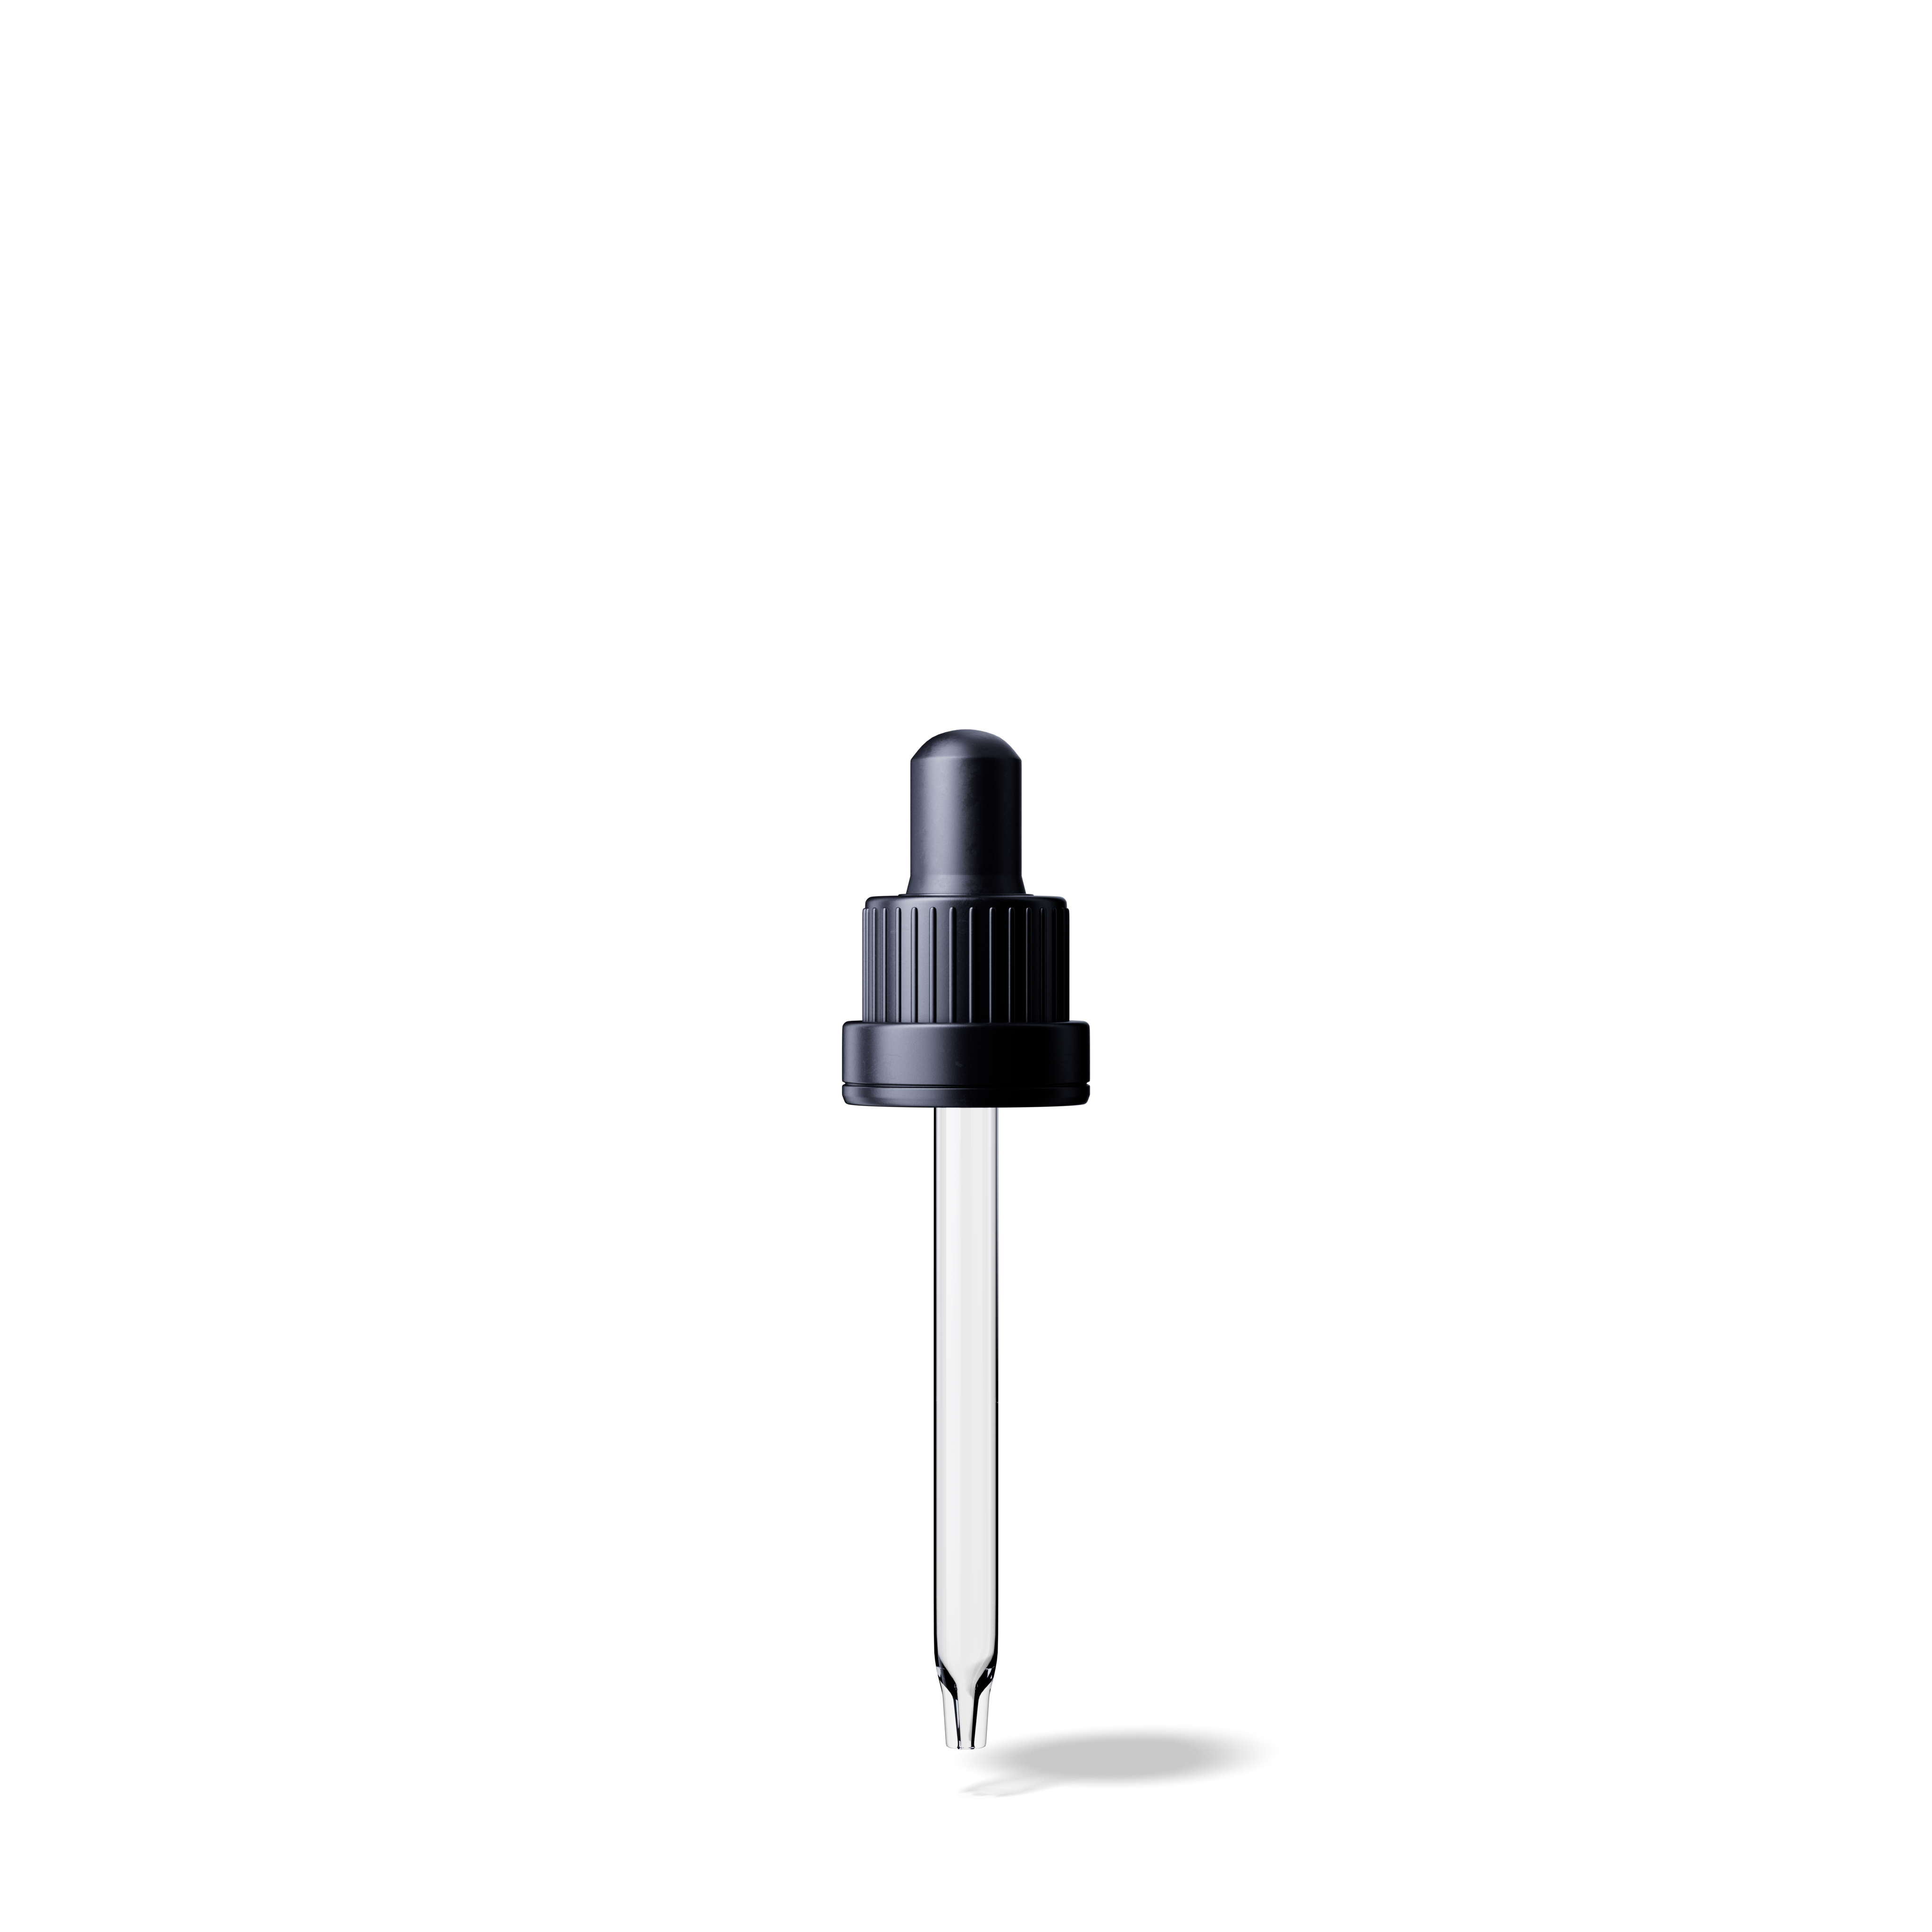 Pipette tamper evident DIN18, III, black, ribbed, bulb NBR, dose 0.7ml, conical tip (Orion 30)